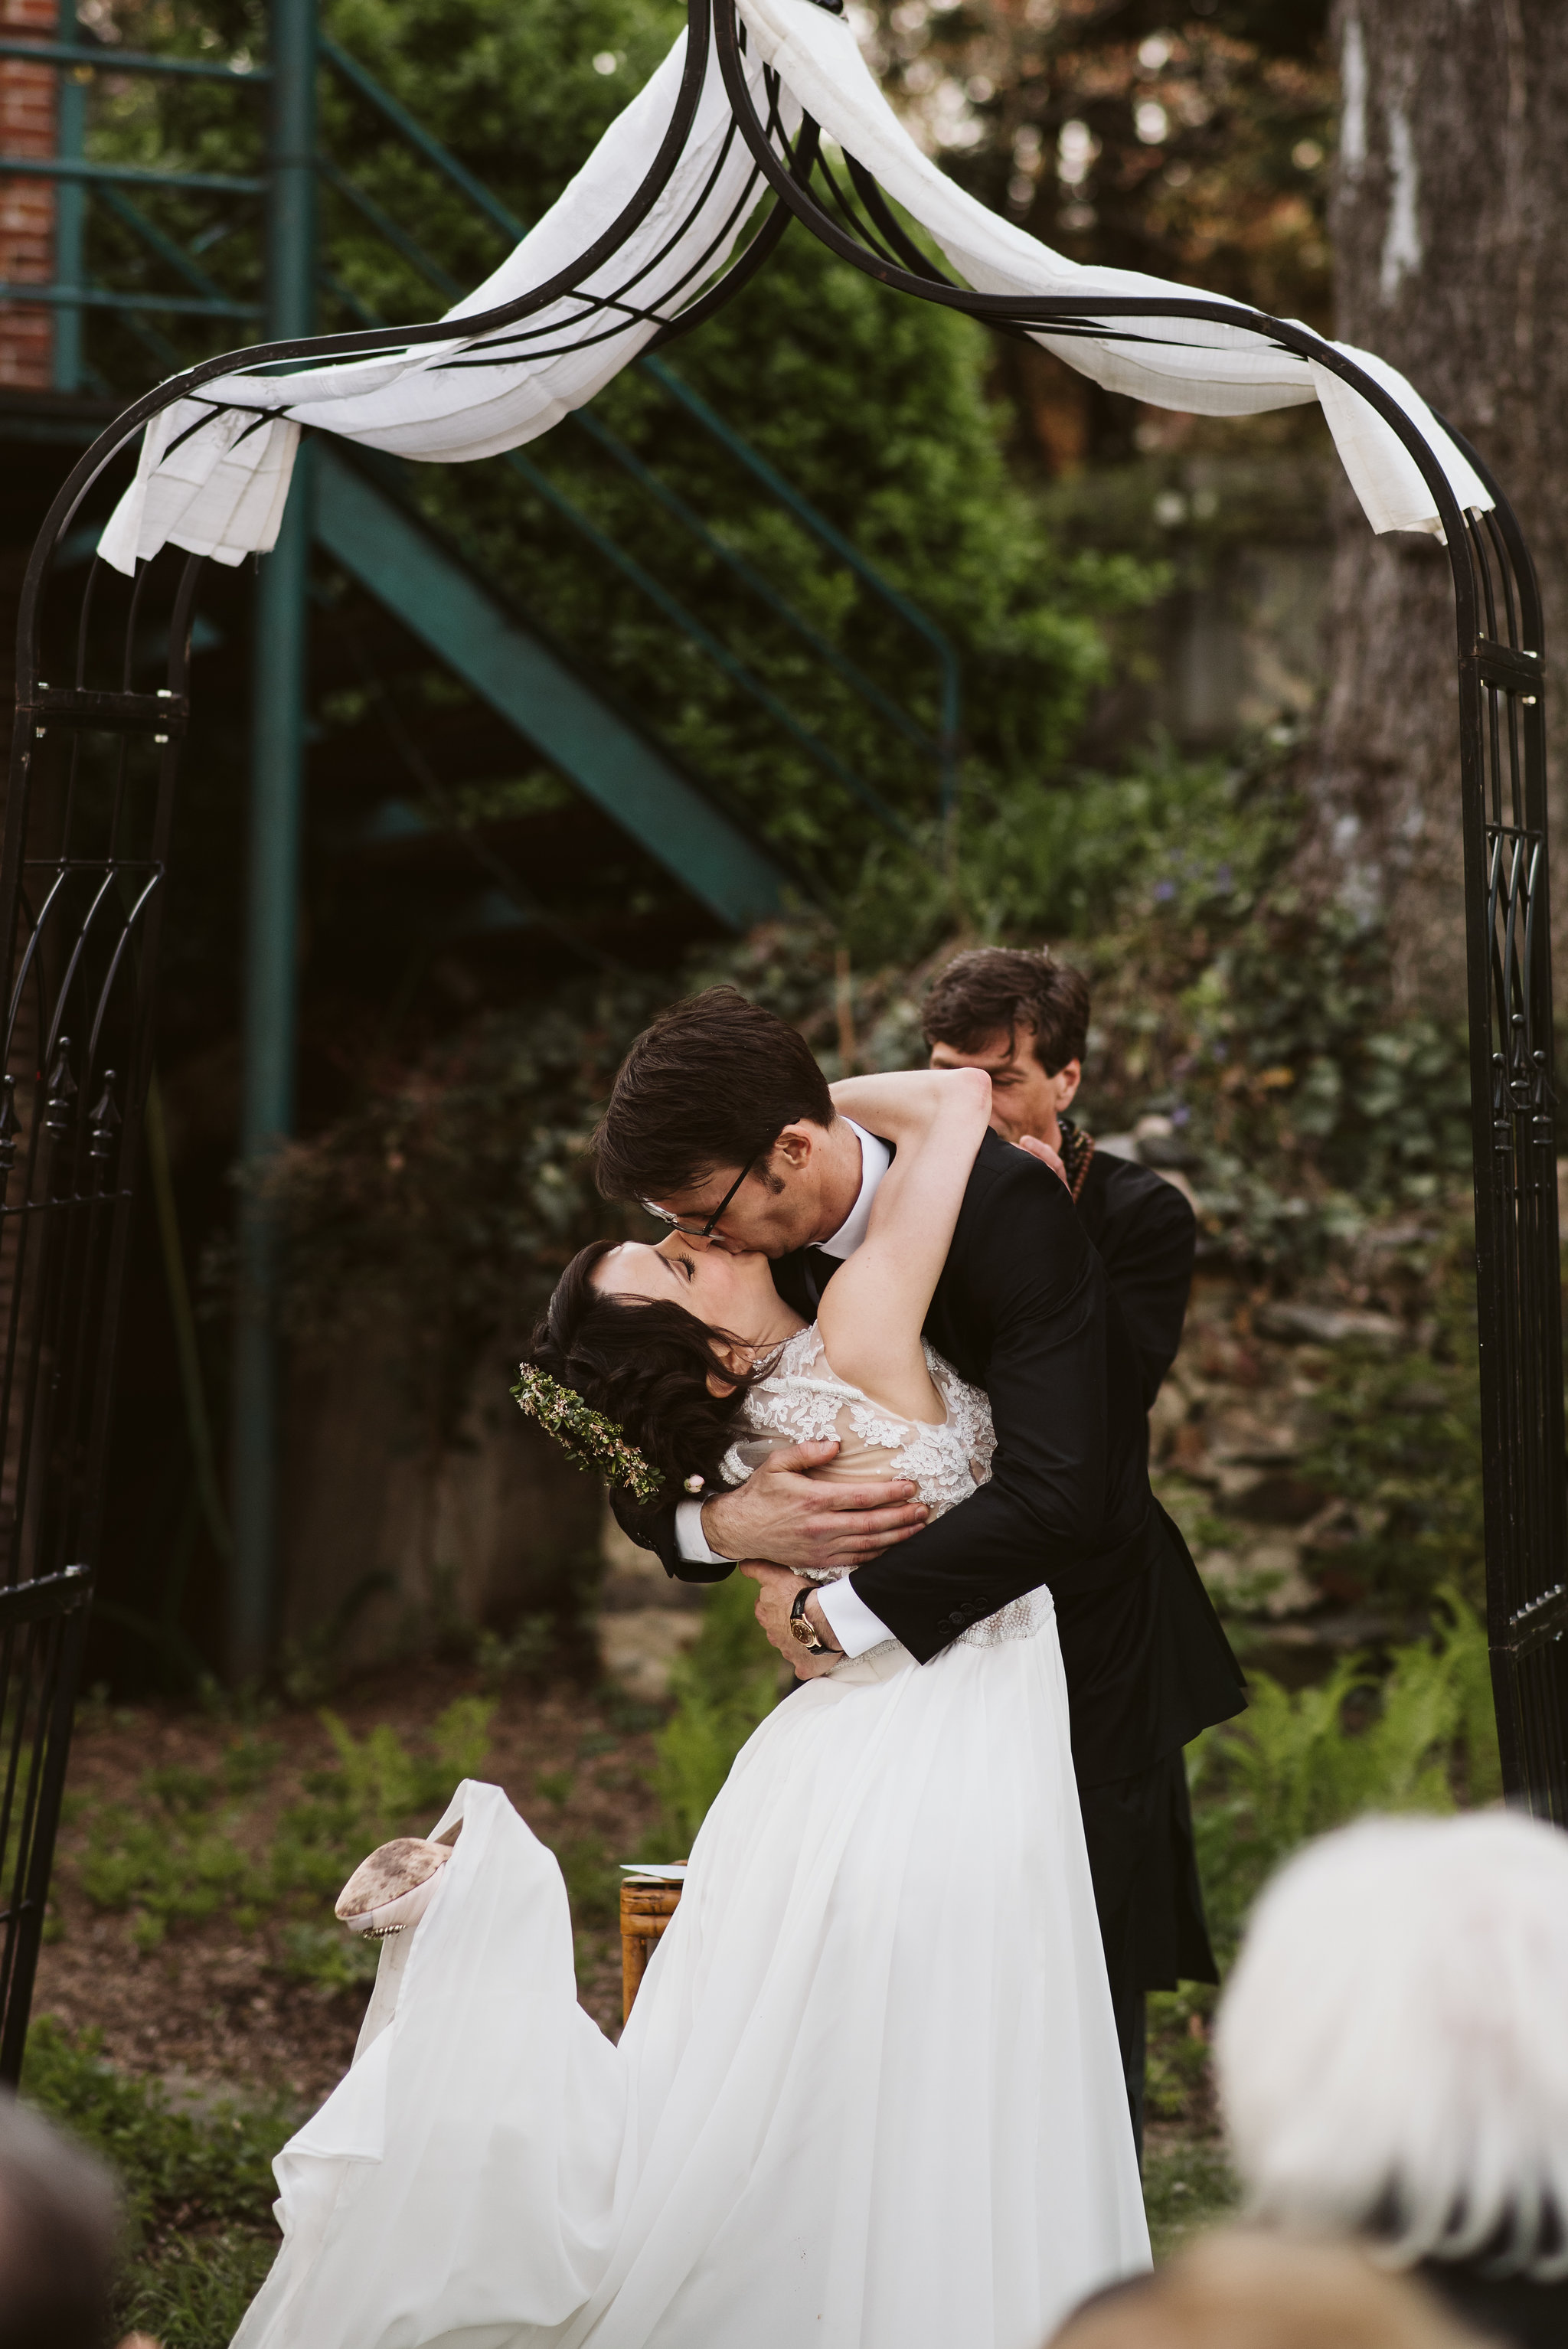  Baltimore, Maryland Wedding Photographer, Hampden, Eco-Friendly, Green, The Elm, Simple and Classic, Vintage, Bride and Groom Share First Kiss, Just Married 